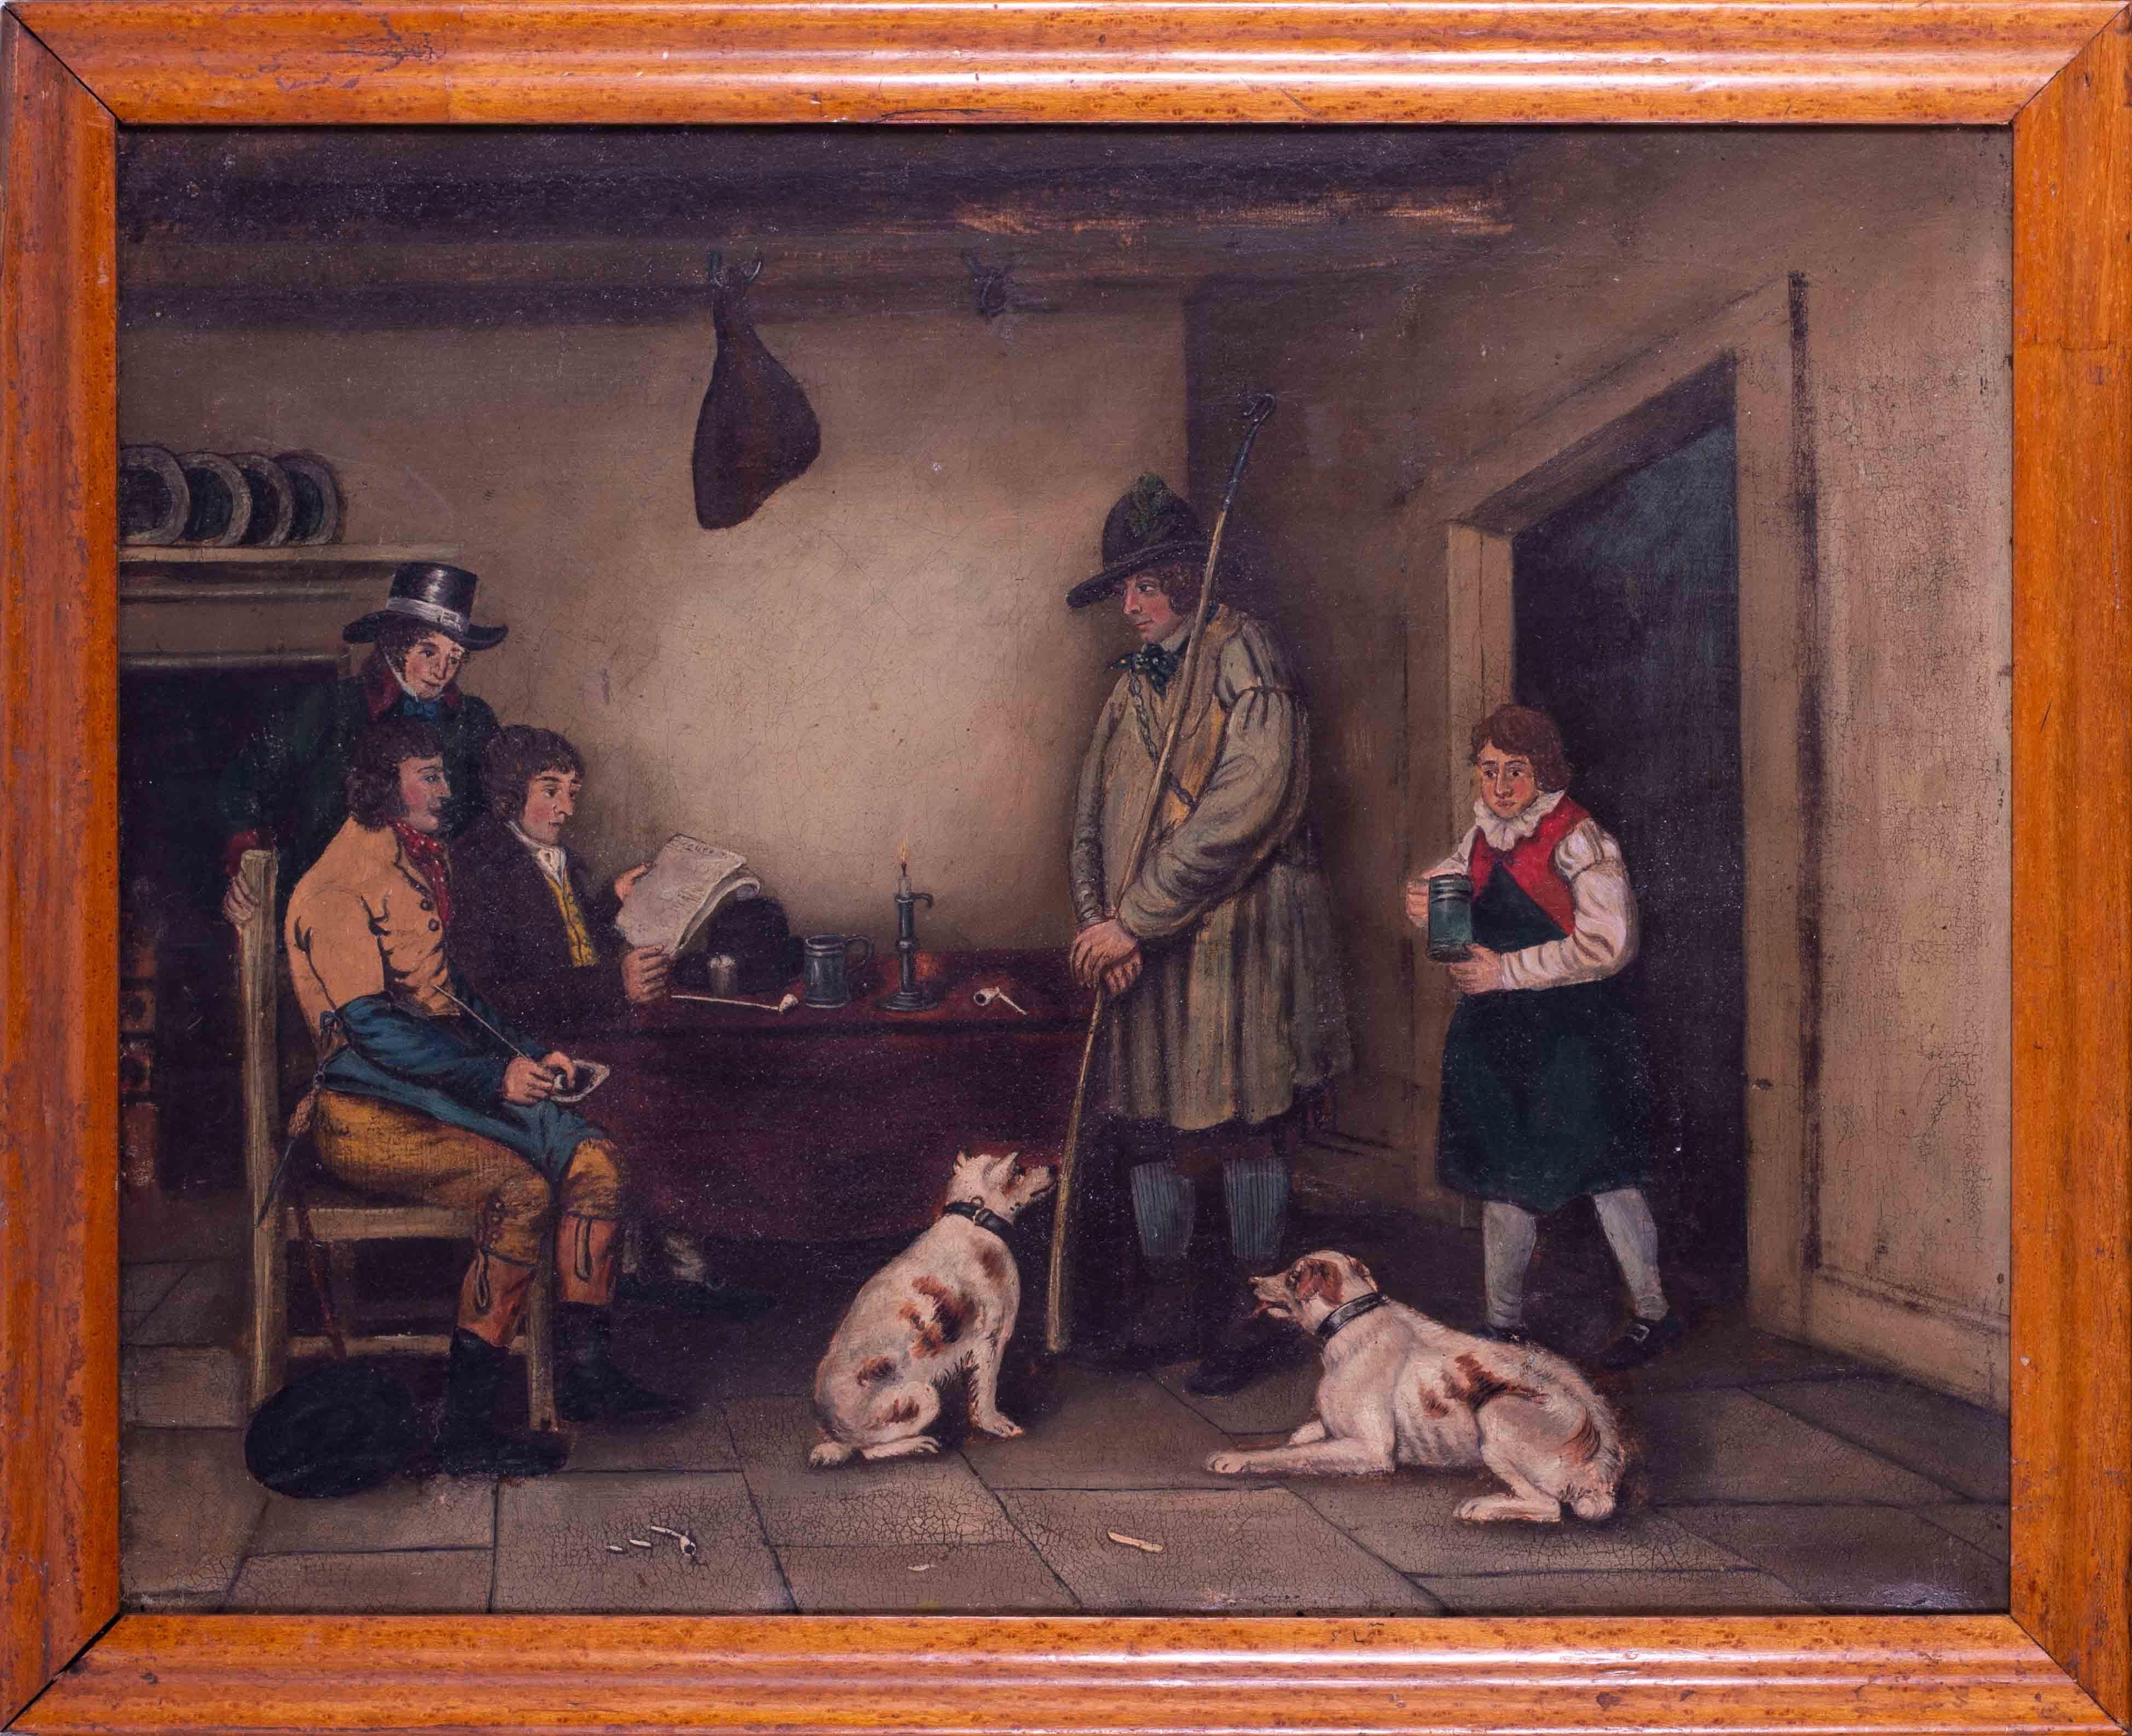 Unknown Figurative Painting - Early 19th Century, English provincial school, 'Travellers at the inn